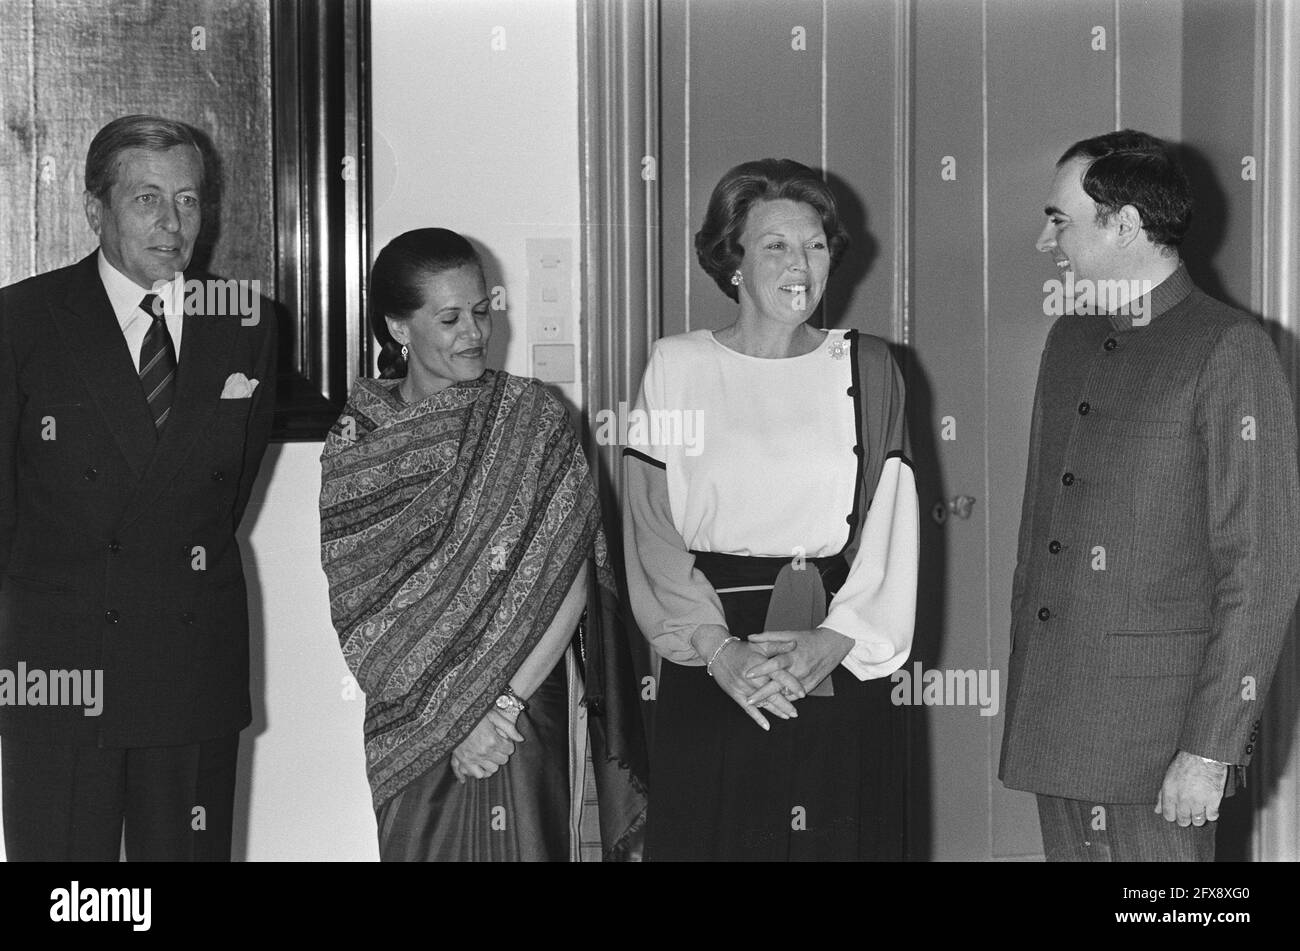 Visit Prime Minister Rajiv Gandhi of India; reception at Palace Huis ten Bosch; Prince Claus, Mrs. Gandhi, Queen Beatrix, October 25, 1985, Receipts, visits, queens, prime ministers, The Netherlands, 20th century press agency photo, news to remember, documentary, historic photography 1945-1990, visual stories, human history of the Twentieth Century, capturing moments in time Stock Photo